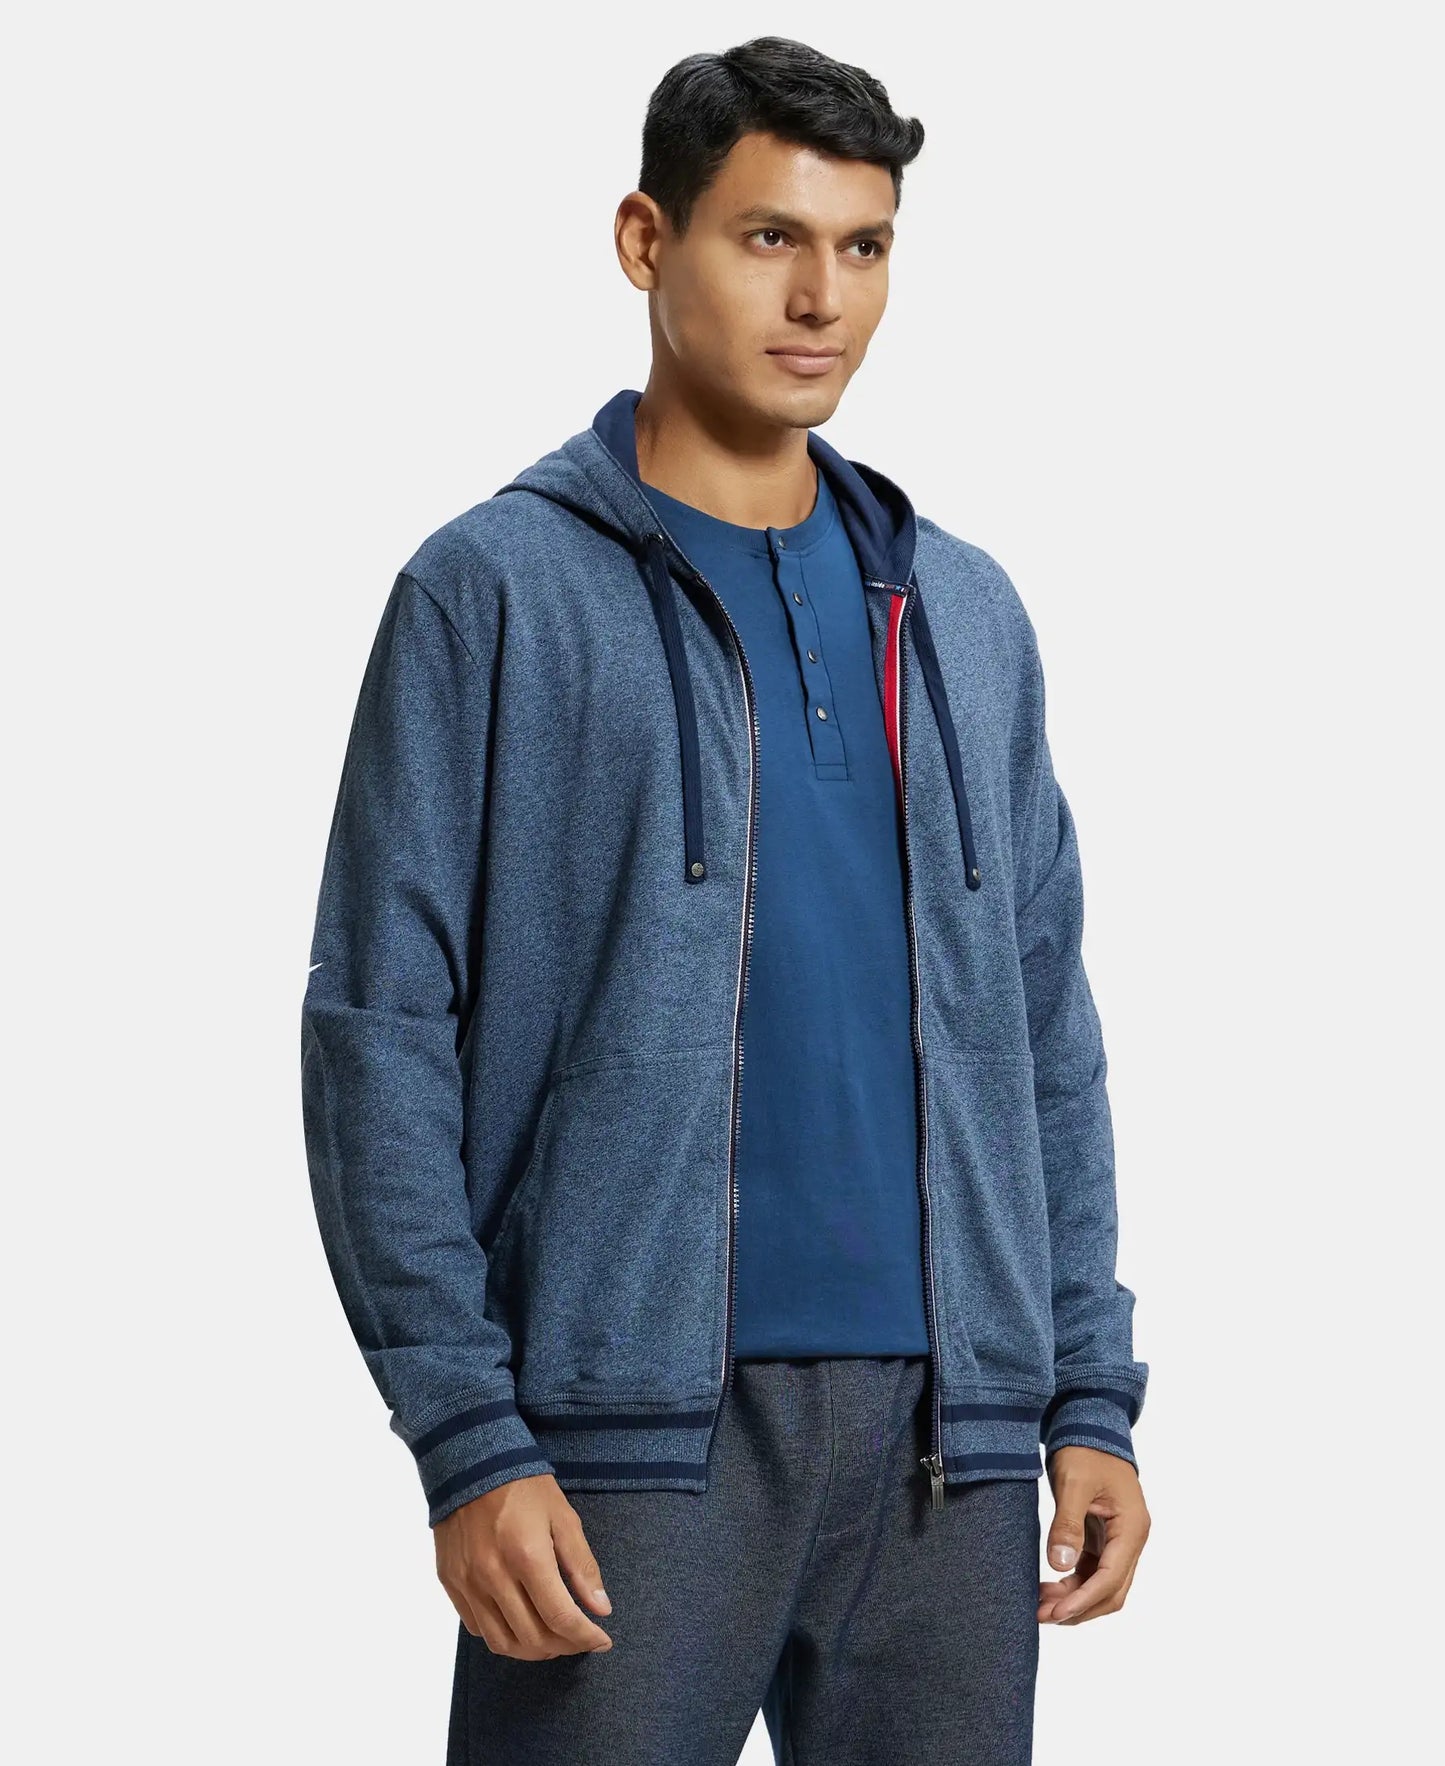 Super Combed Cotton French Terry Hoodie Jacket with Ribbed Cuffs - Navy Grindle-2